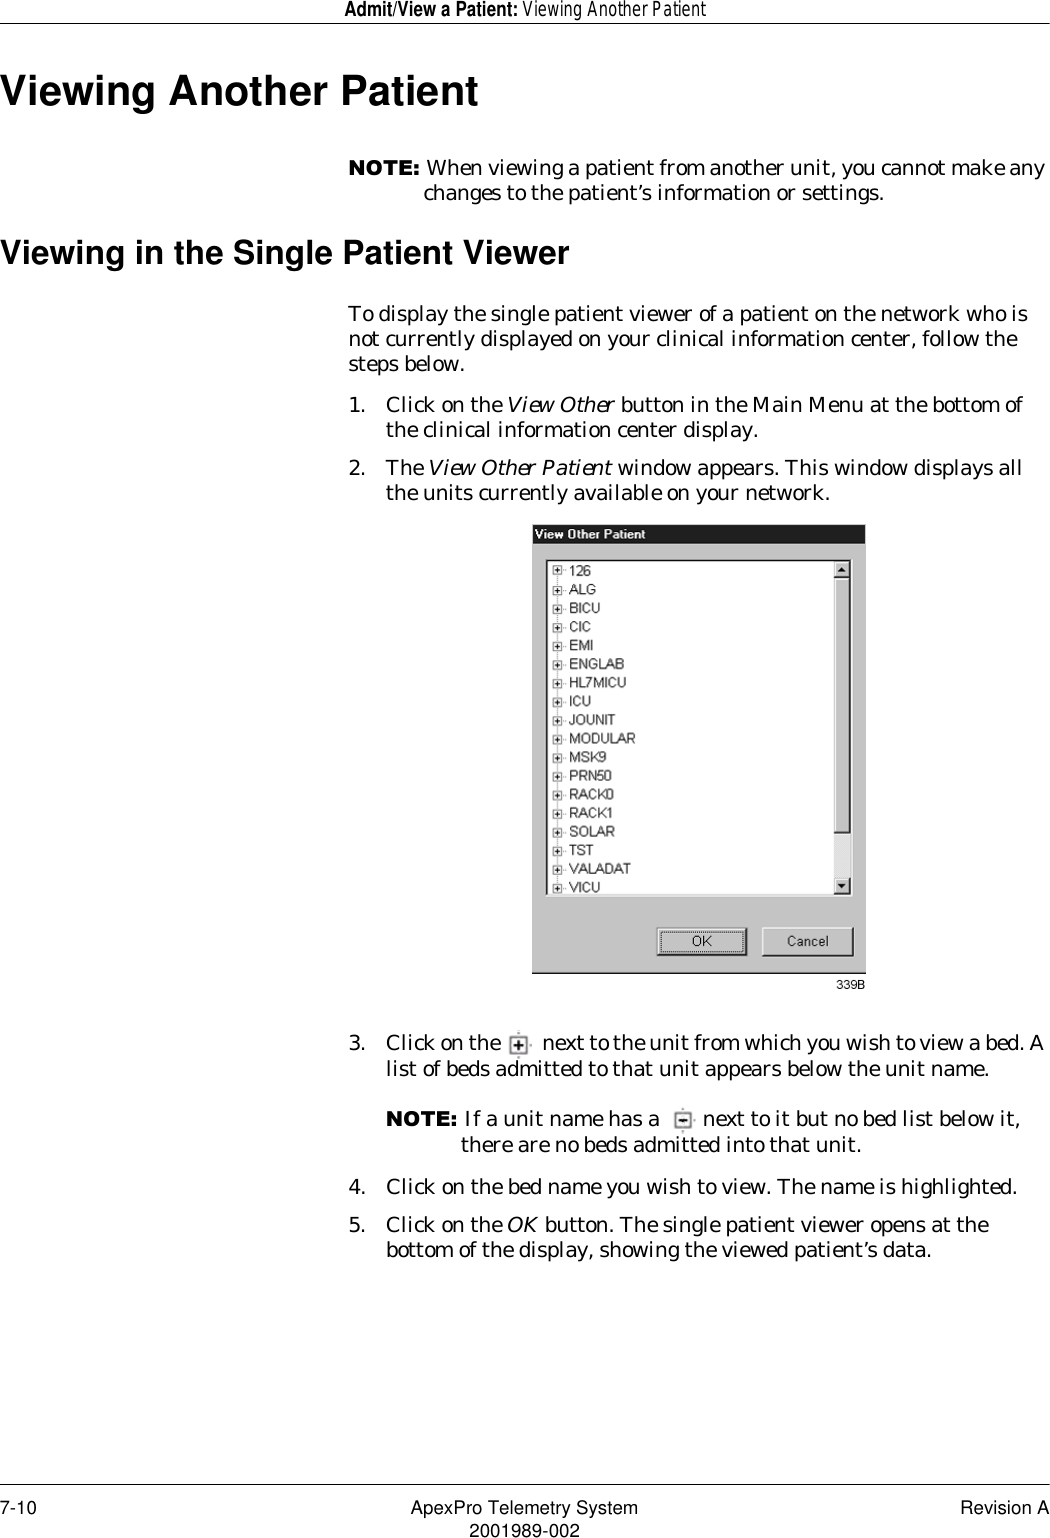 7-10 ApexPro Telemetry System Revision A2001989-002Admit/View a Patient: Viewing Another PatientViewing Another Patient127(When viewing a patient from another unit, you cannot make any changes to the patient’s information or settings.Viewing in the Single Patient ViewerTo display the single patient viewer of a patient on the network who is not currently displayed on your clinical information center, follow the steps below.1. Click on the View Other button in the Main Menu at the bottom of the clinical information center display.2. The View Other Patient window appears. This window displays all the units currently available on your network.3. Click on the  next to the unit from which you wish to view a bed. A list of beds admitted to that unit appears below the unit name.127(If a unit name has a  next to it but no bed list below it, there are no beds admitted into that unit.4. Click on the bed name you wish to view. The name is highlighted.5. Click on the OK button. The single patient viewer opens at the bottom of the display, showing the viewed patient’s data.